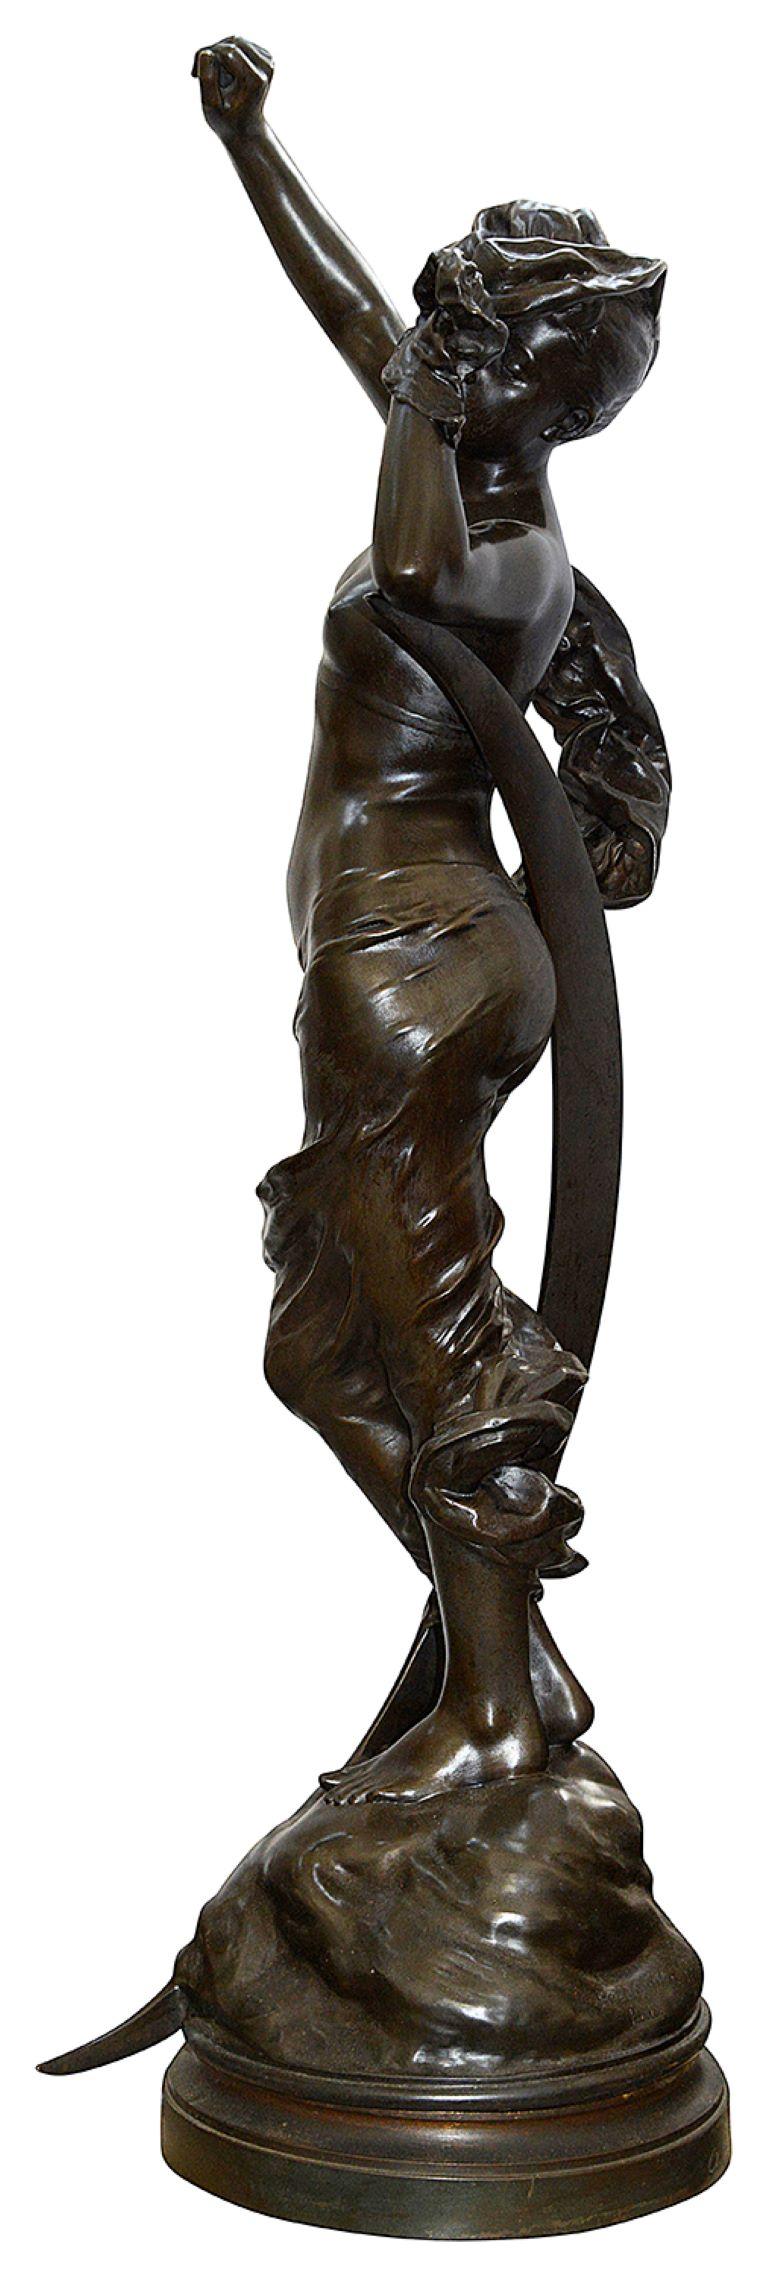 A very good quality late 19th Century Bronze statue of a semi clad maiden with her arms out stretched, standing in front of the Moons crescent.
Signed; Henri Houdebine. Henri Houdebine founded his company in 1845. He gained a great reputation in the